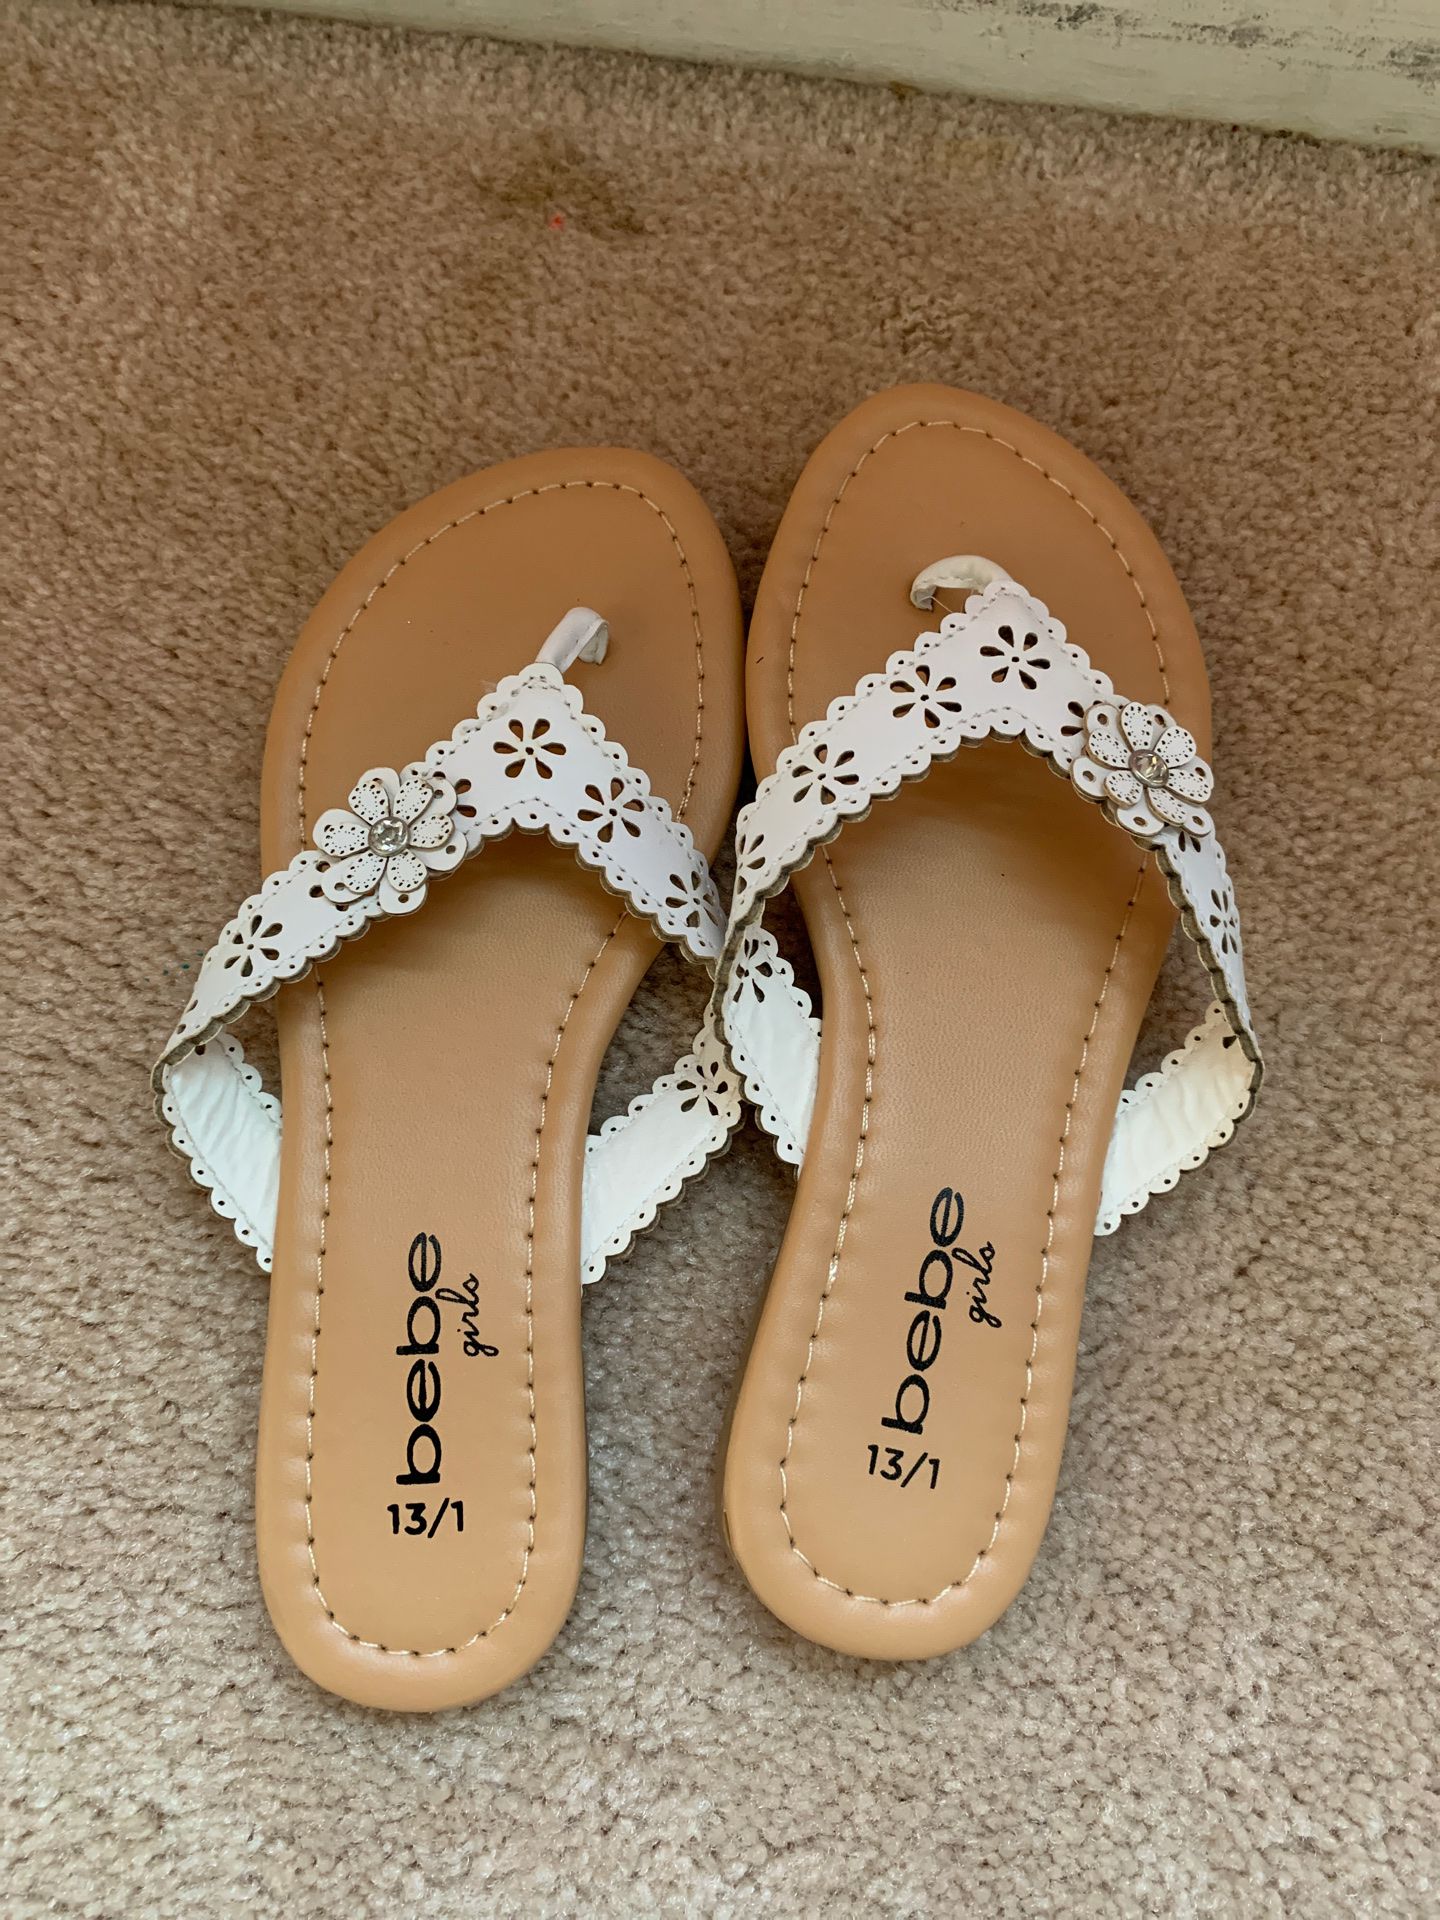 Toddler sandals size 13-1